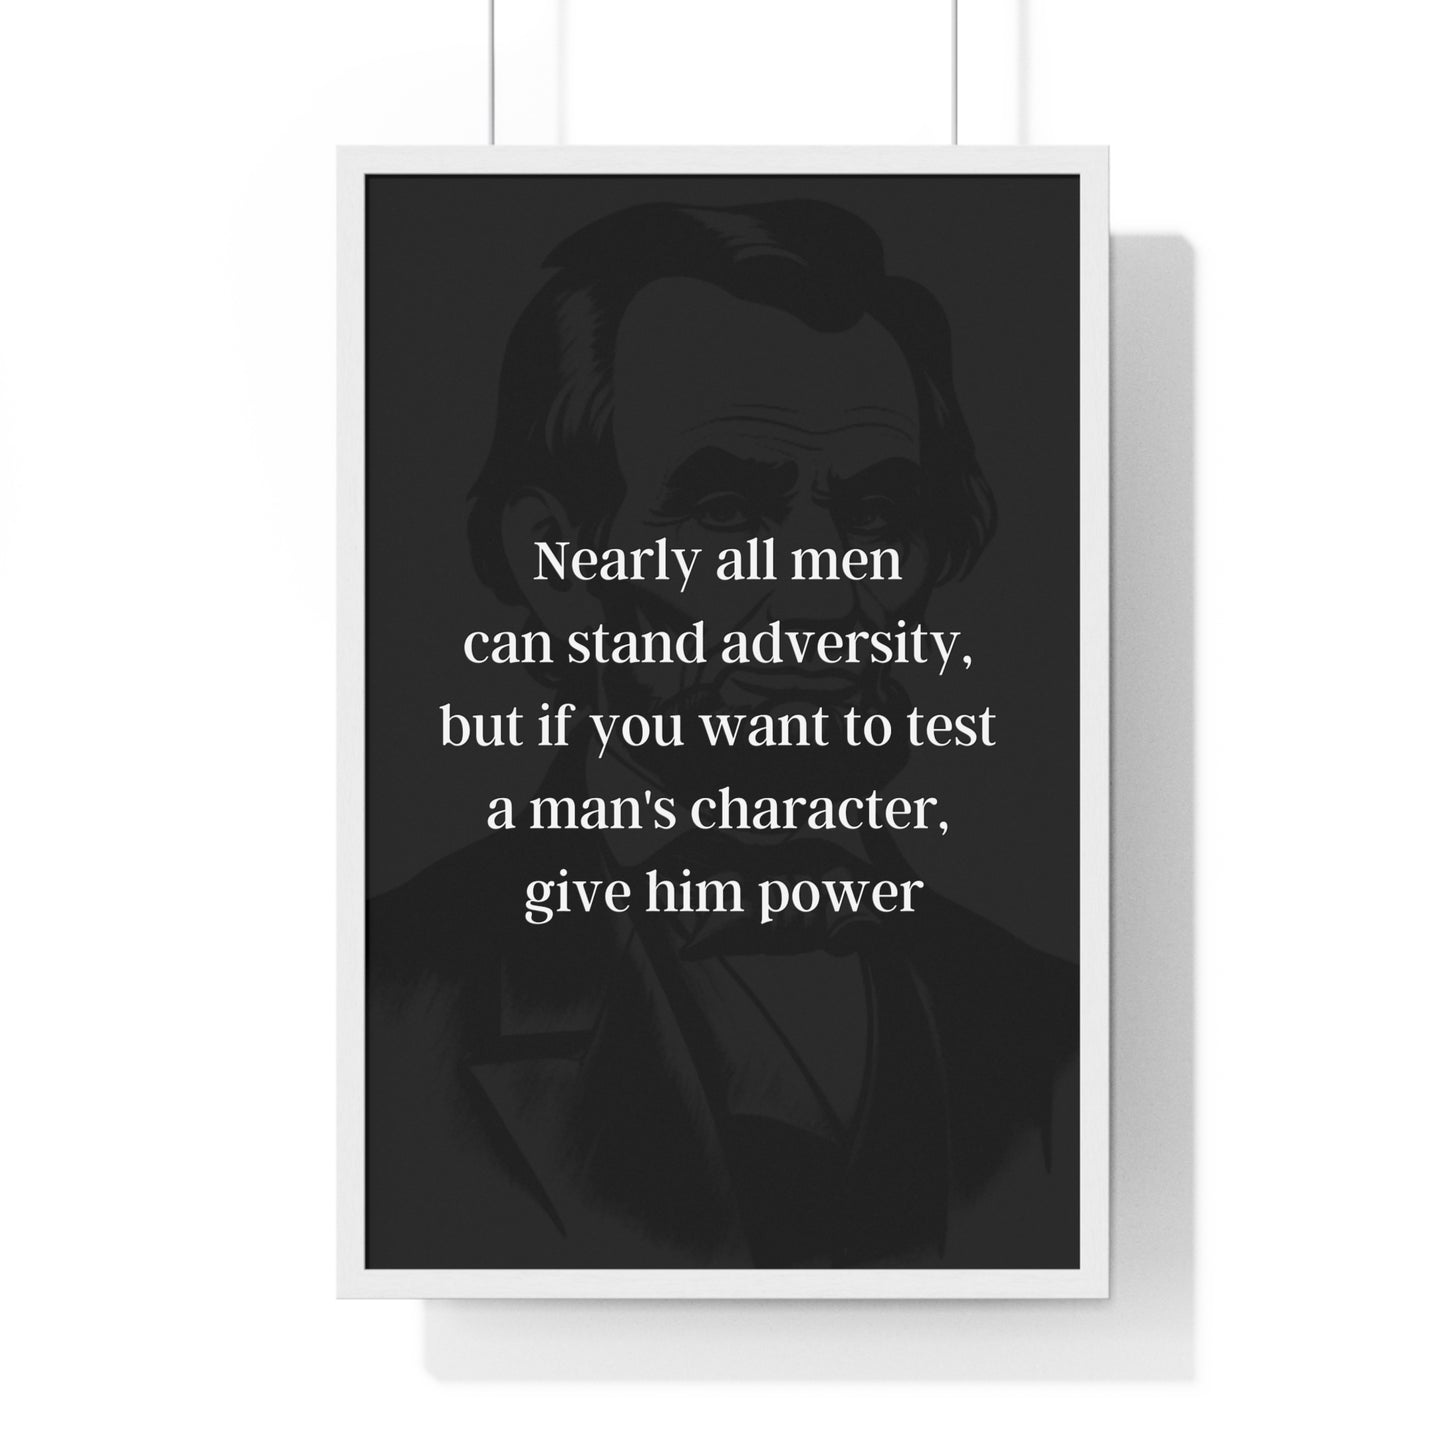 Abraham Lincoln Quote 5, Poster Art, Dark Print, 16th President of the United States, American Patriots, AI Art, Political Art, Poster Prints, Presidential Portraits, Presidential Quotes, Inspirational Quotes